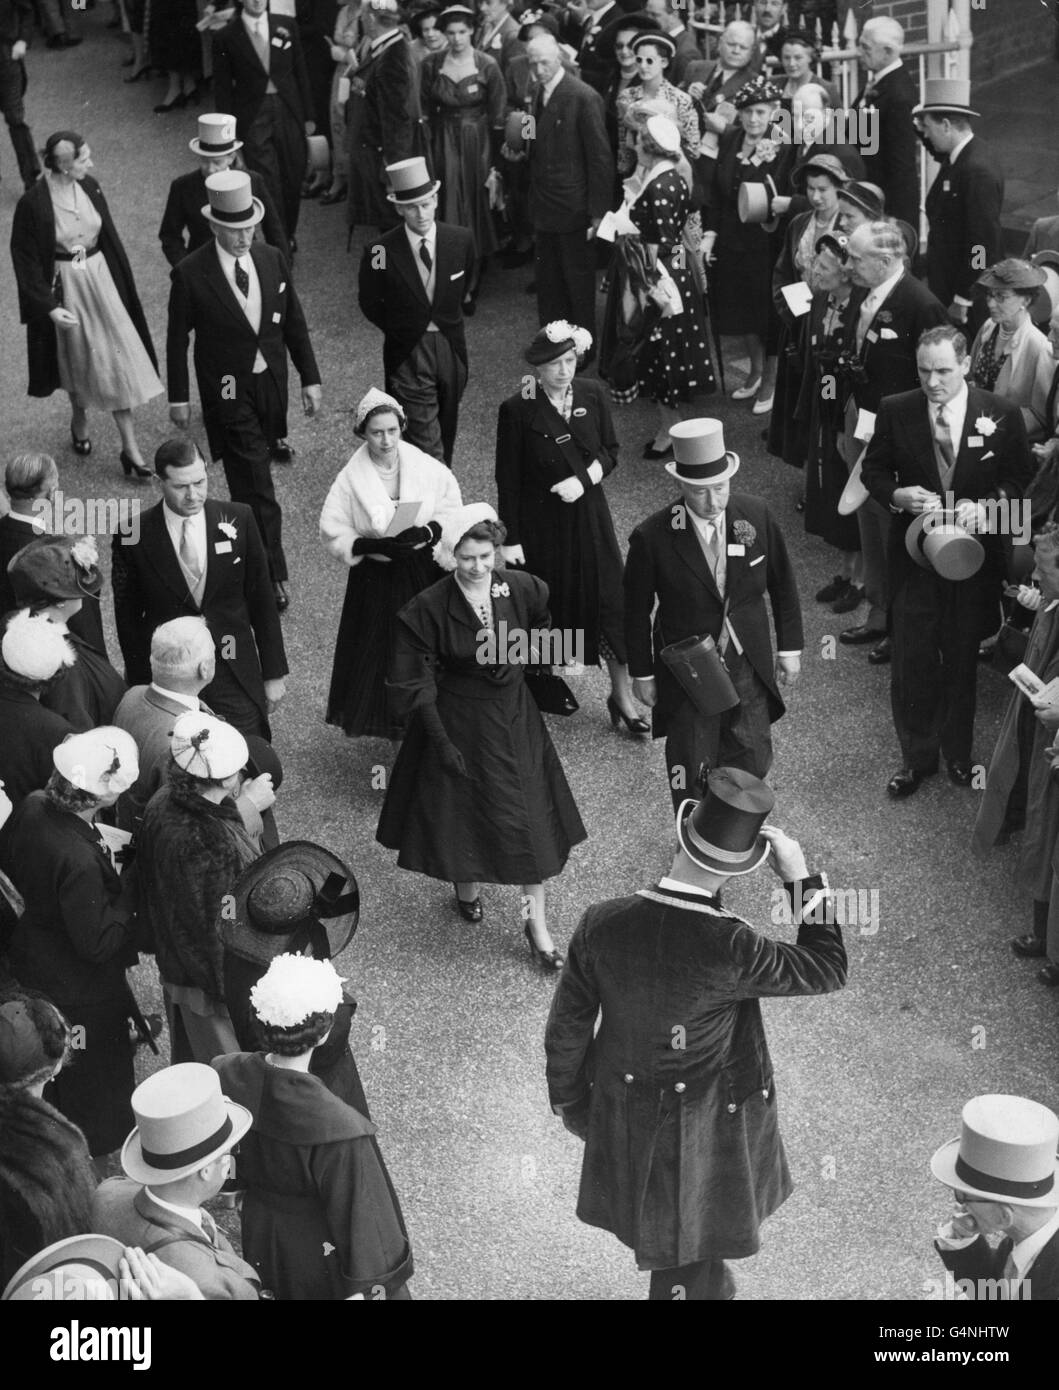 Queen Elizabeth II, dressed in black with a white hat, followed by Princess Margaret and the Princess Royal (with hand in a sling), near the Paddock at Ascot Racecourse, on the second day of Royal Ascot meeting. Behind the Princess Royal is the Duke of Edinburgh. Stock Photo